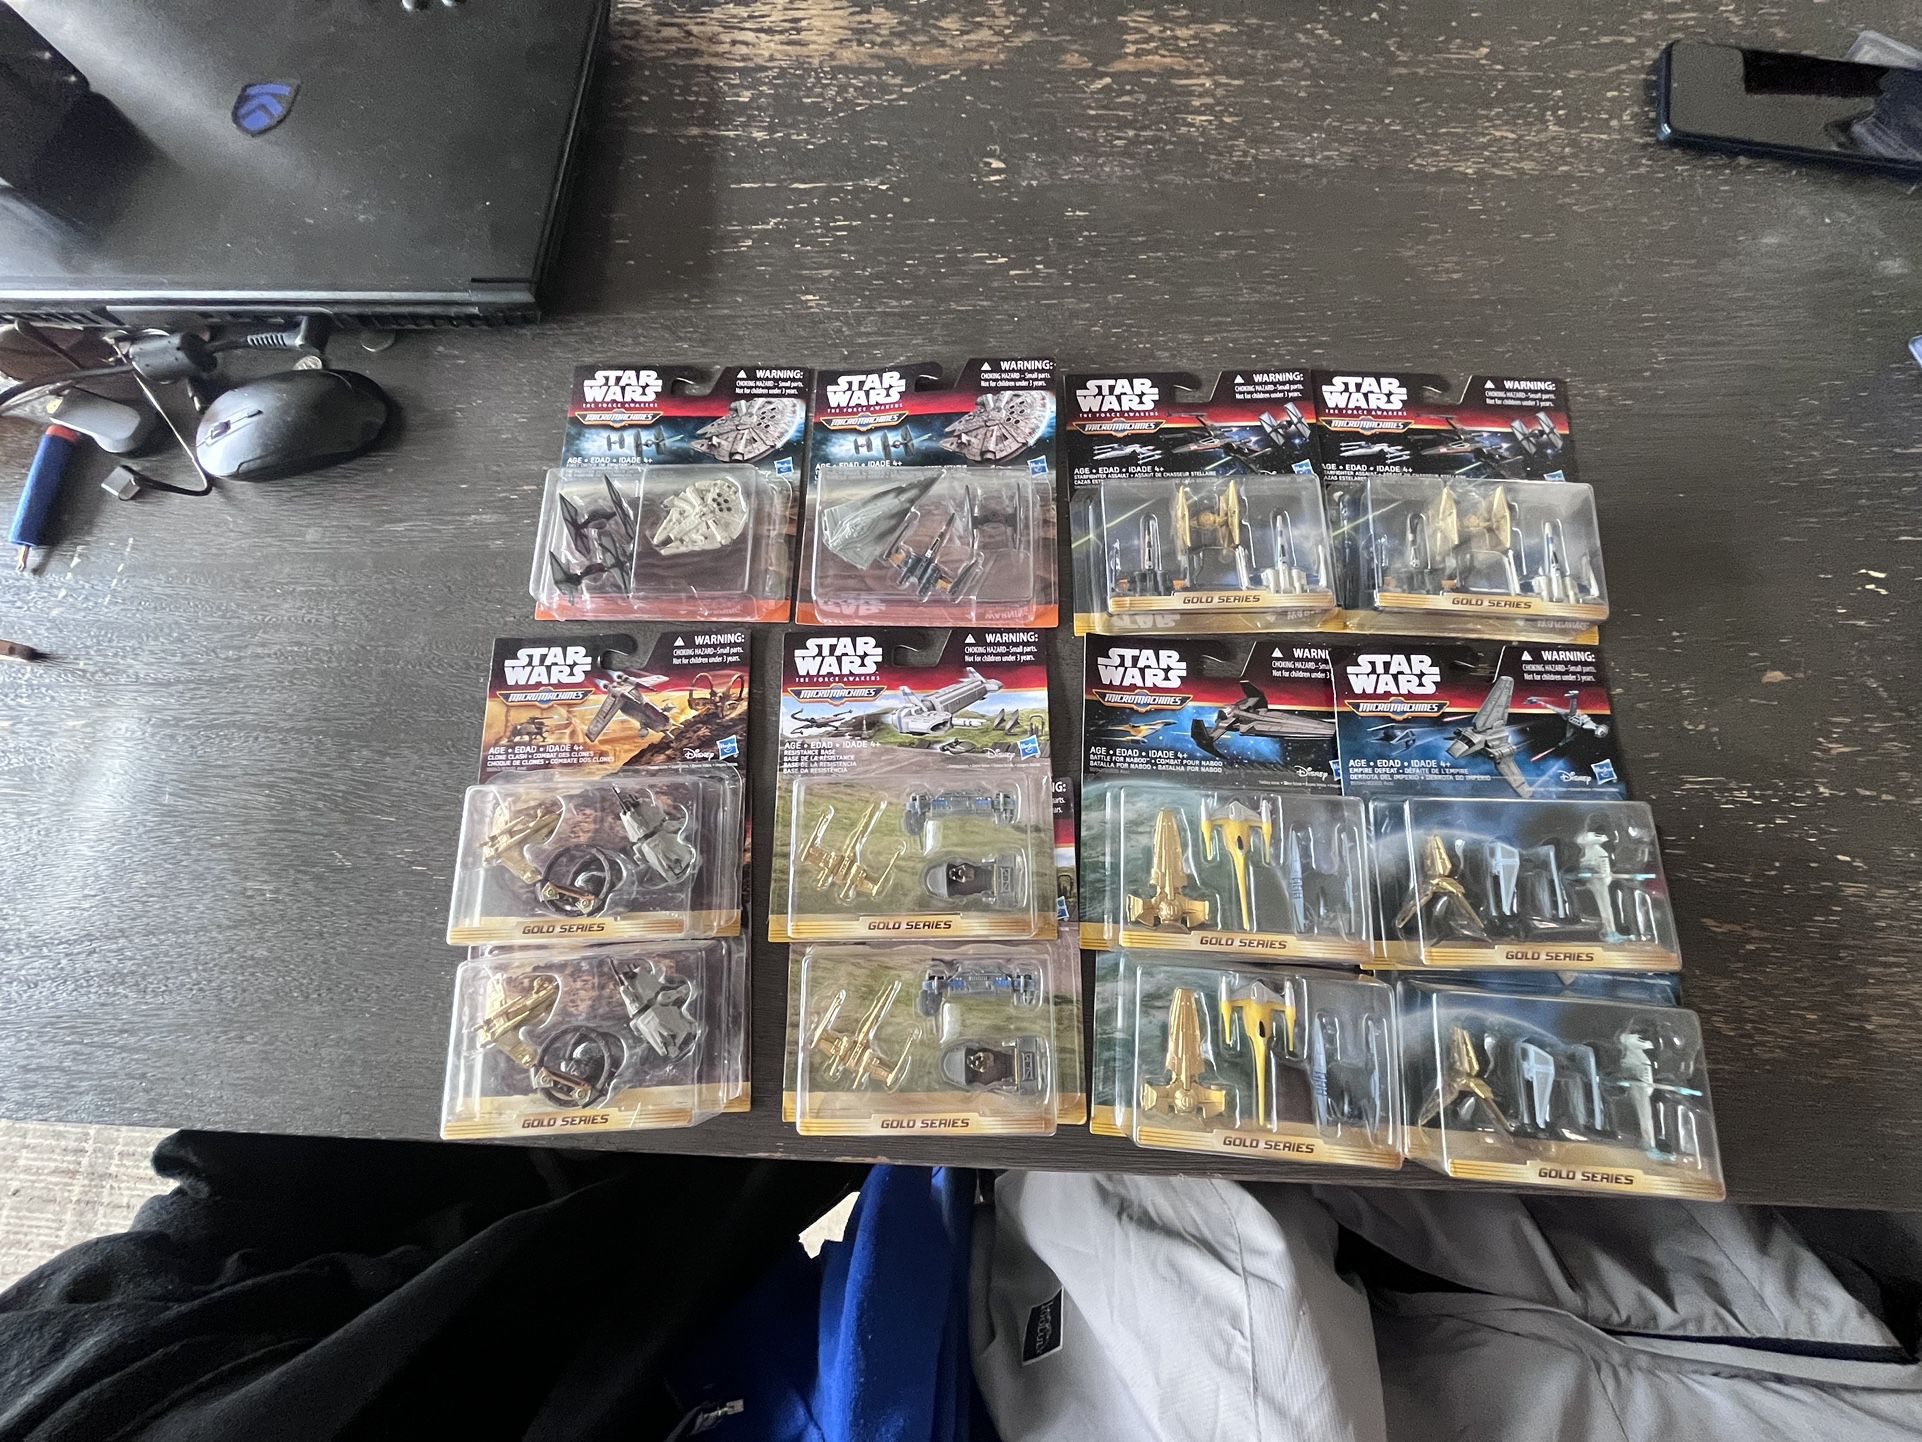 STAR WARS MICROMACHINES - The Force Awakens / Attack Of Clones / Battle Of Naboo GOLD SERIES